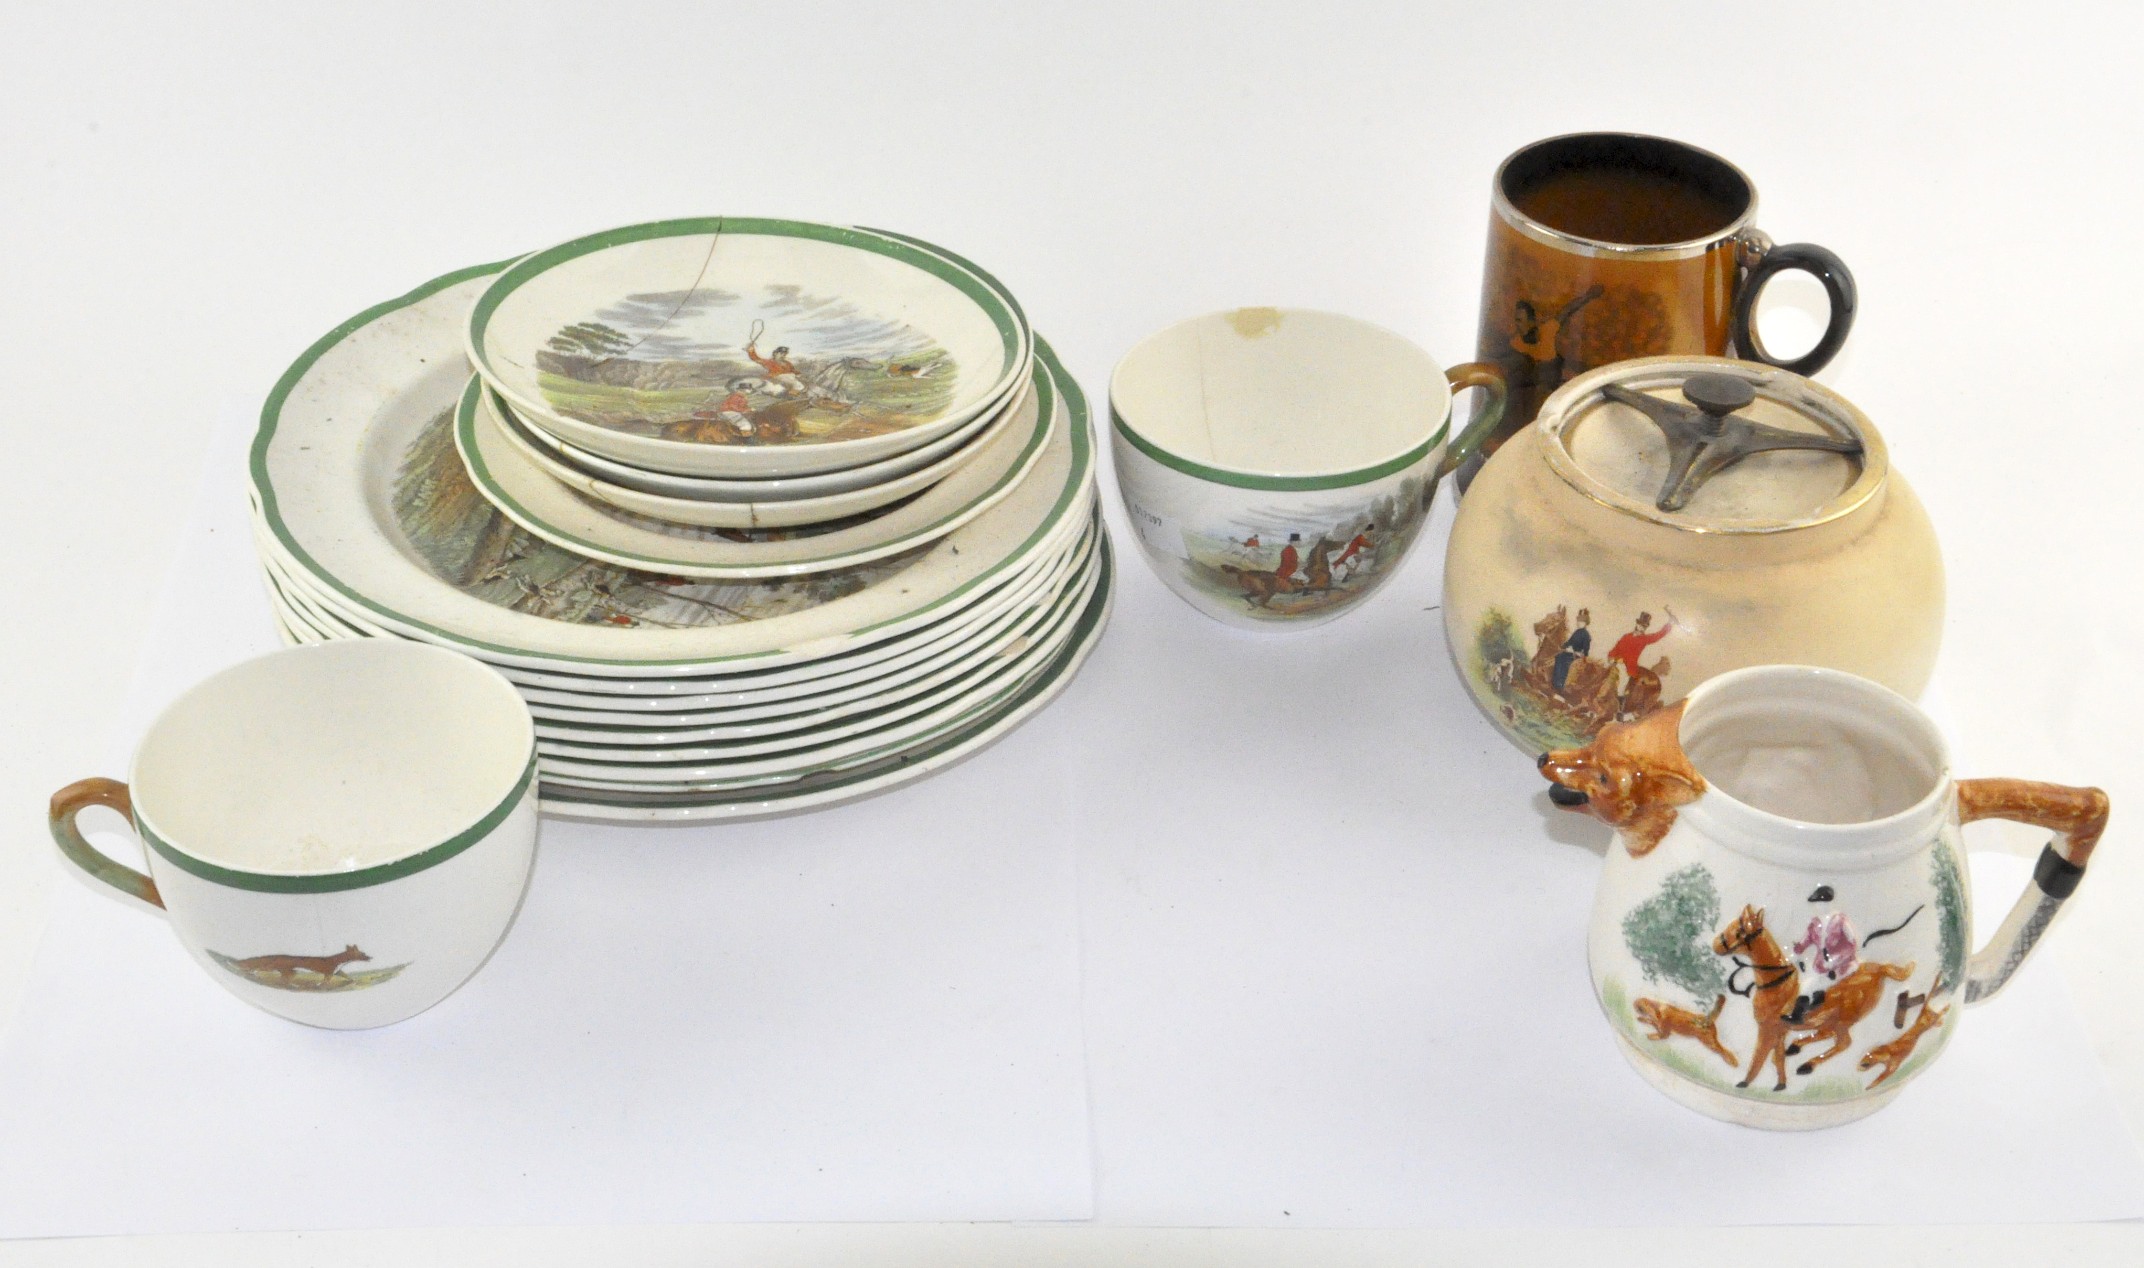 A collection of Copeland Spode ceramics depicting traditional fox hunting scenes,